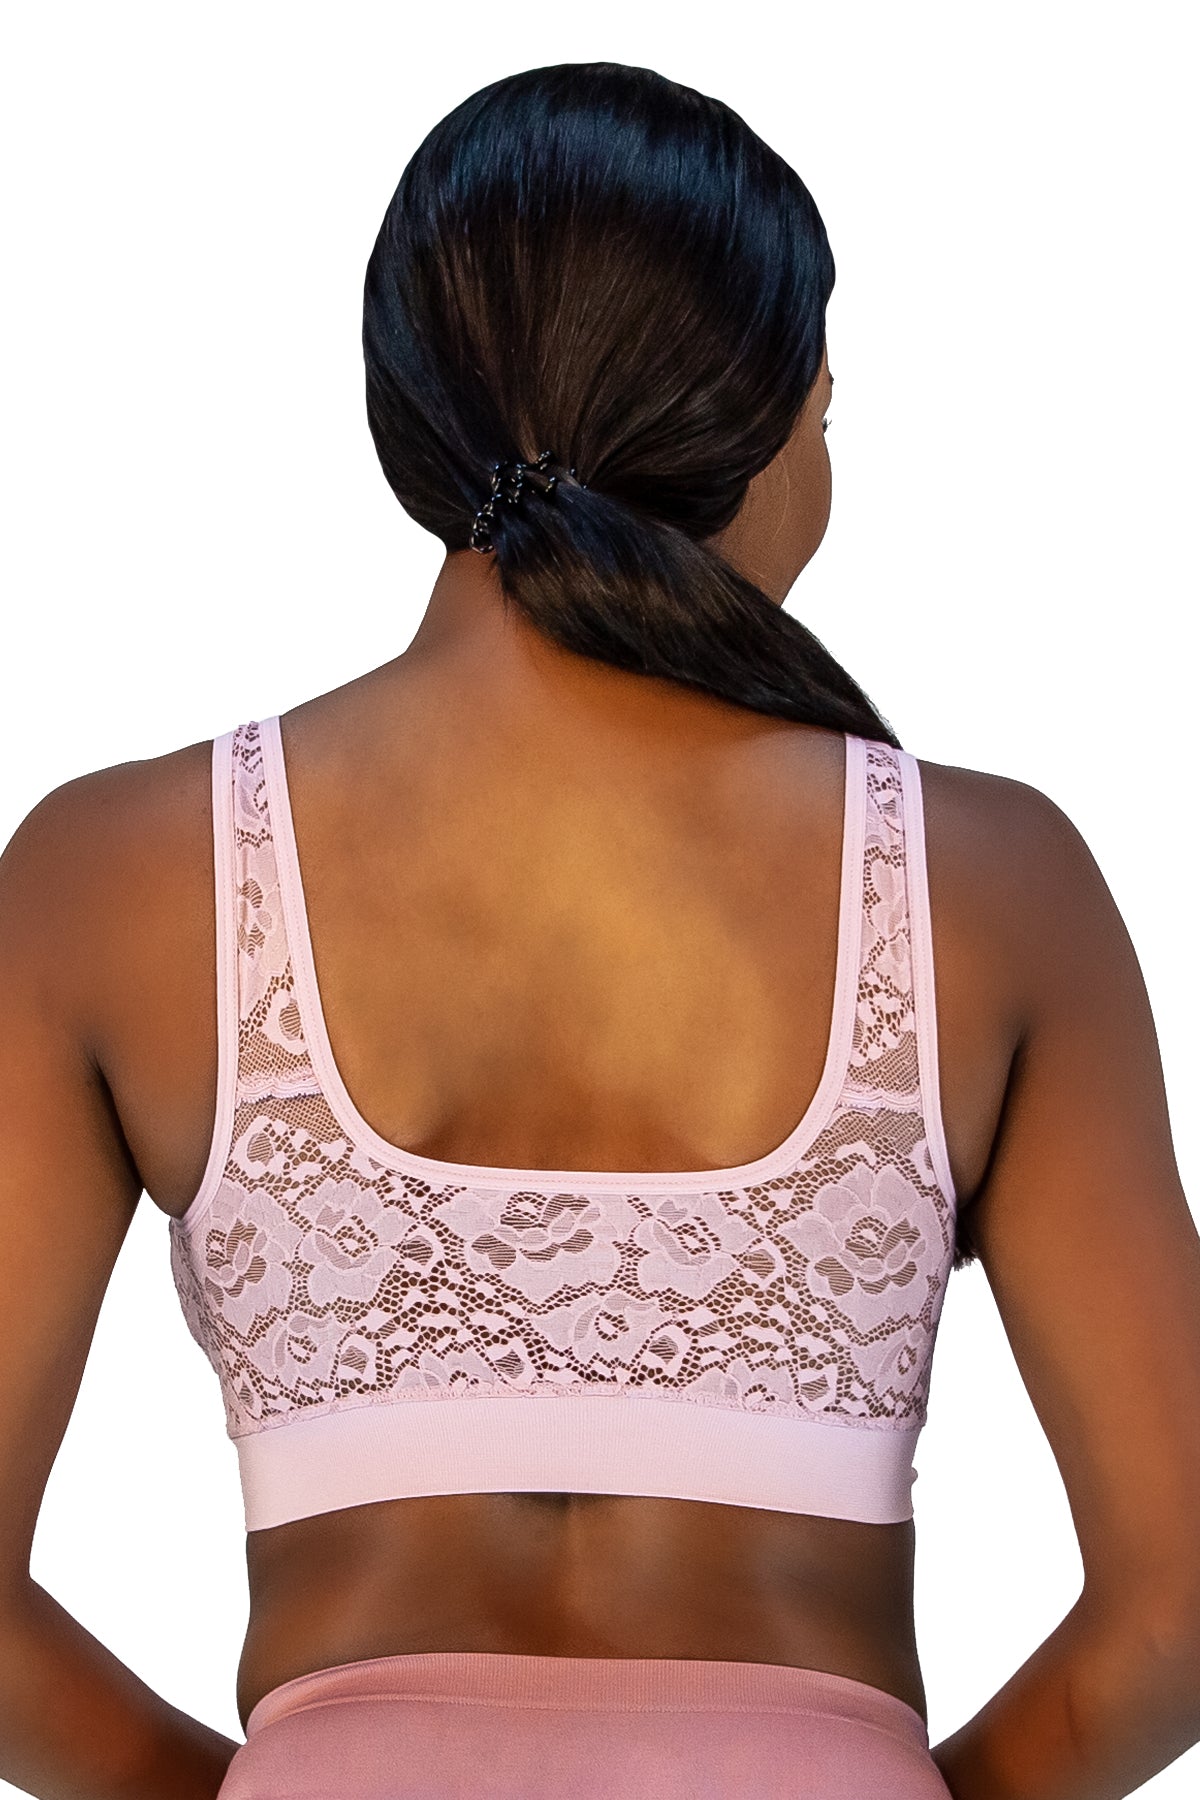 Wholesale Bras From Colombia Cotton, Lace, Seamless, Shaping 